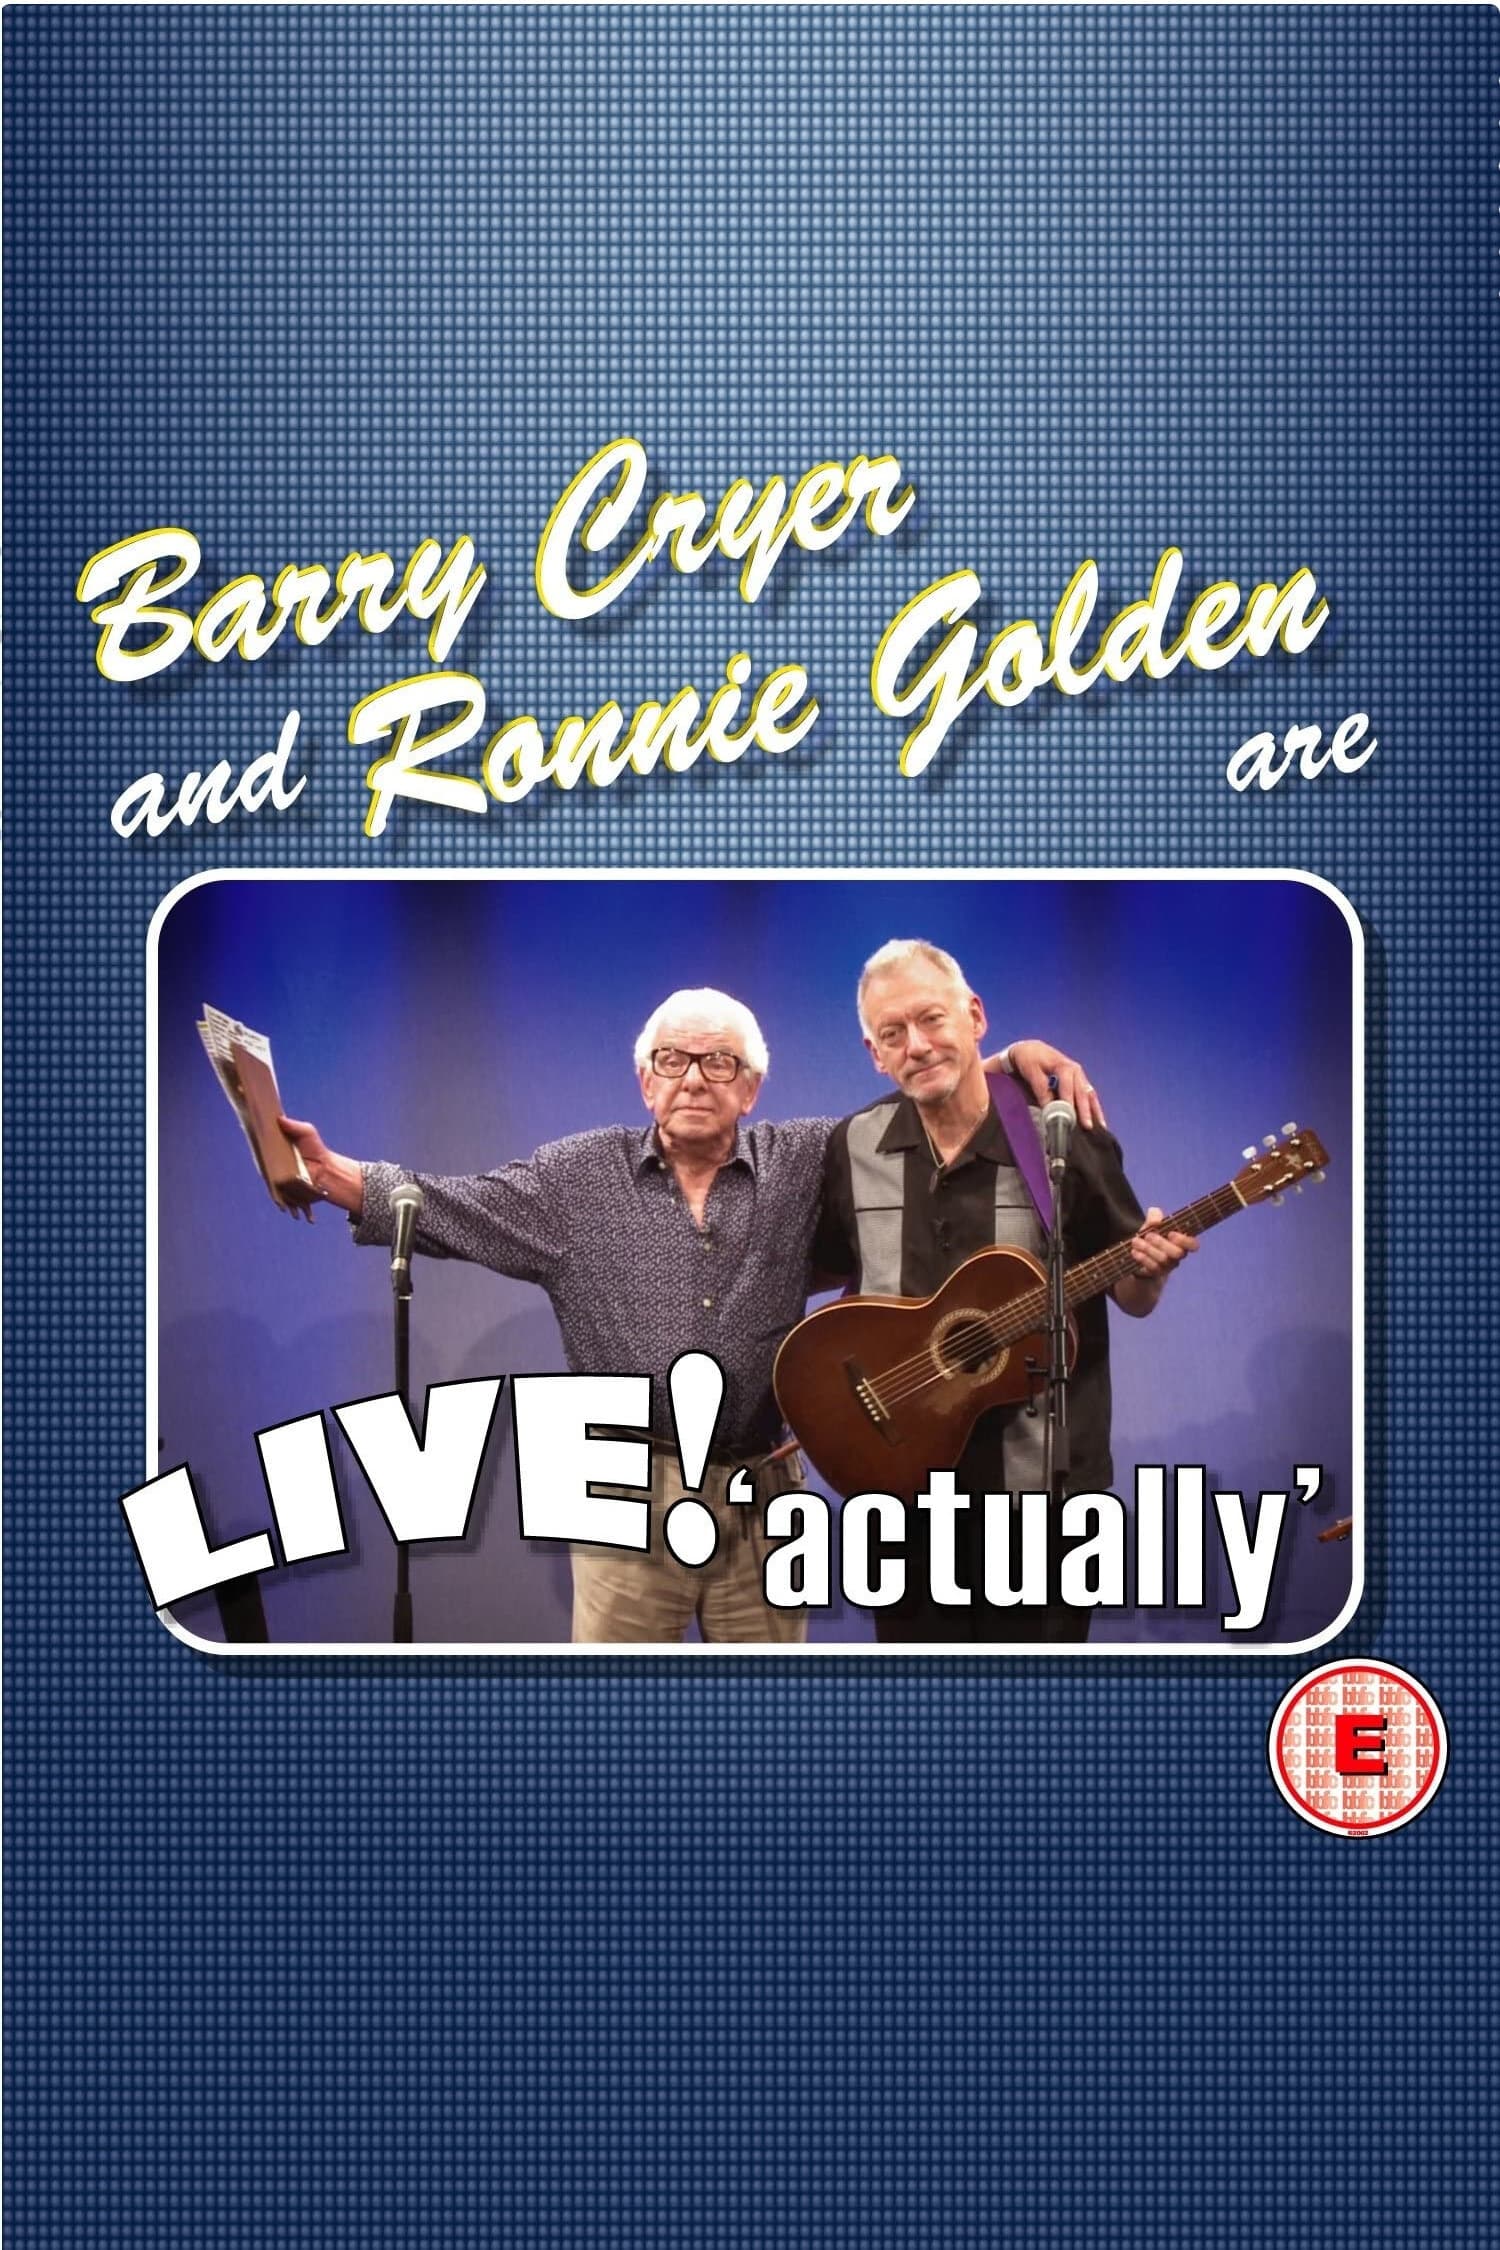 Barry Cryer and Ronnie Golden - Live! Actually